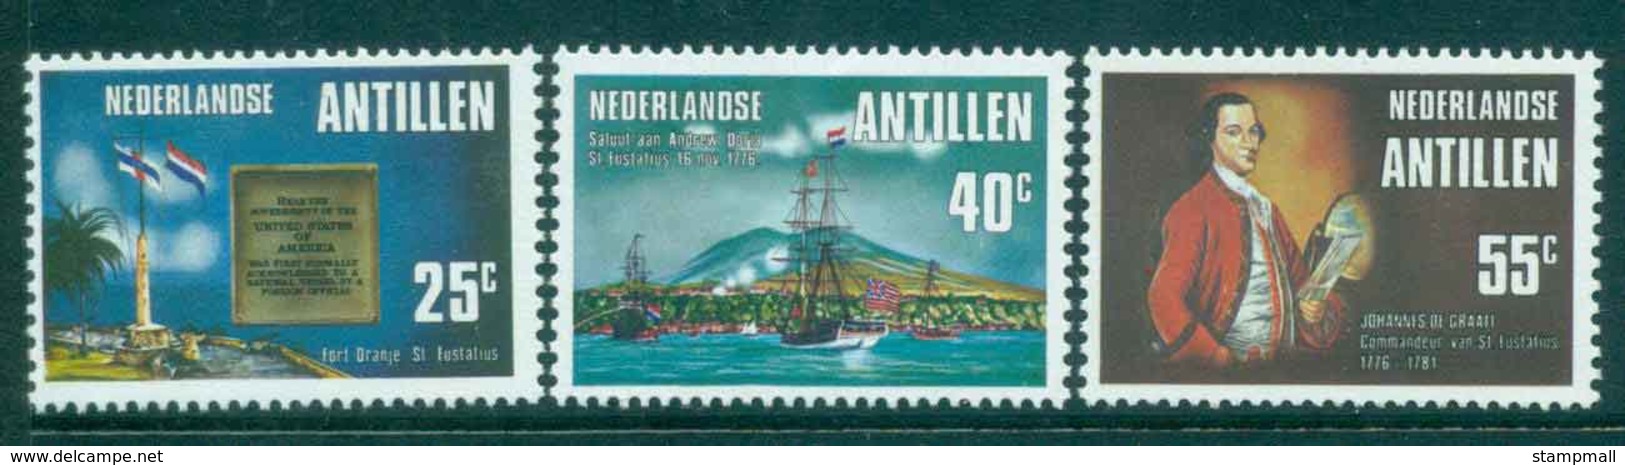 Netherlands Antilles 1976 Salute To US Flag MUH Lot47142 - West Indies